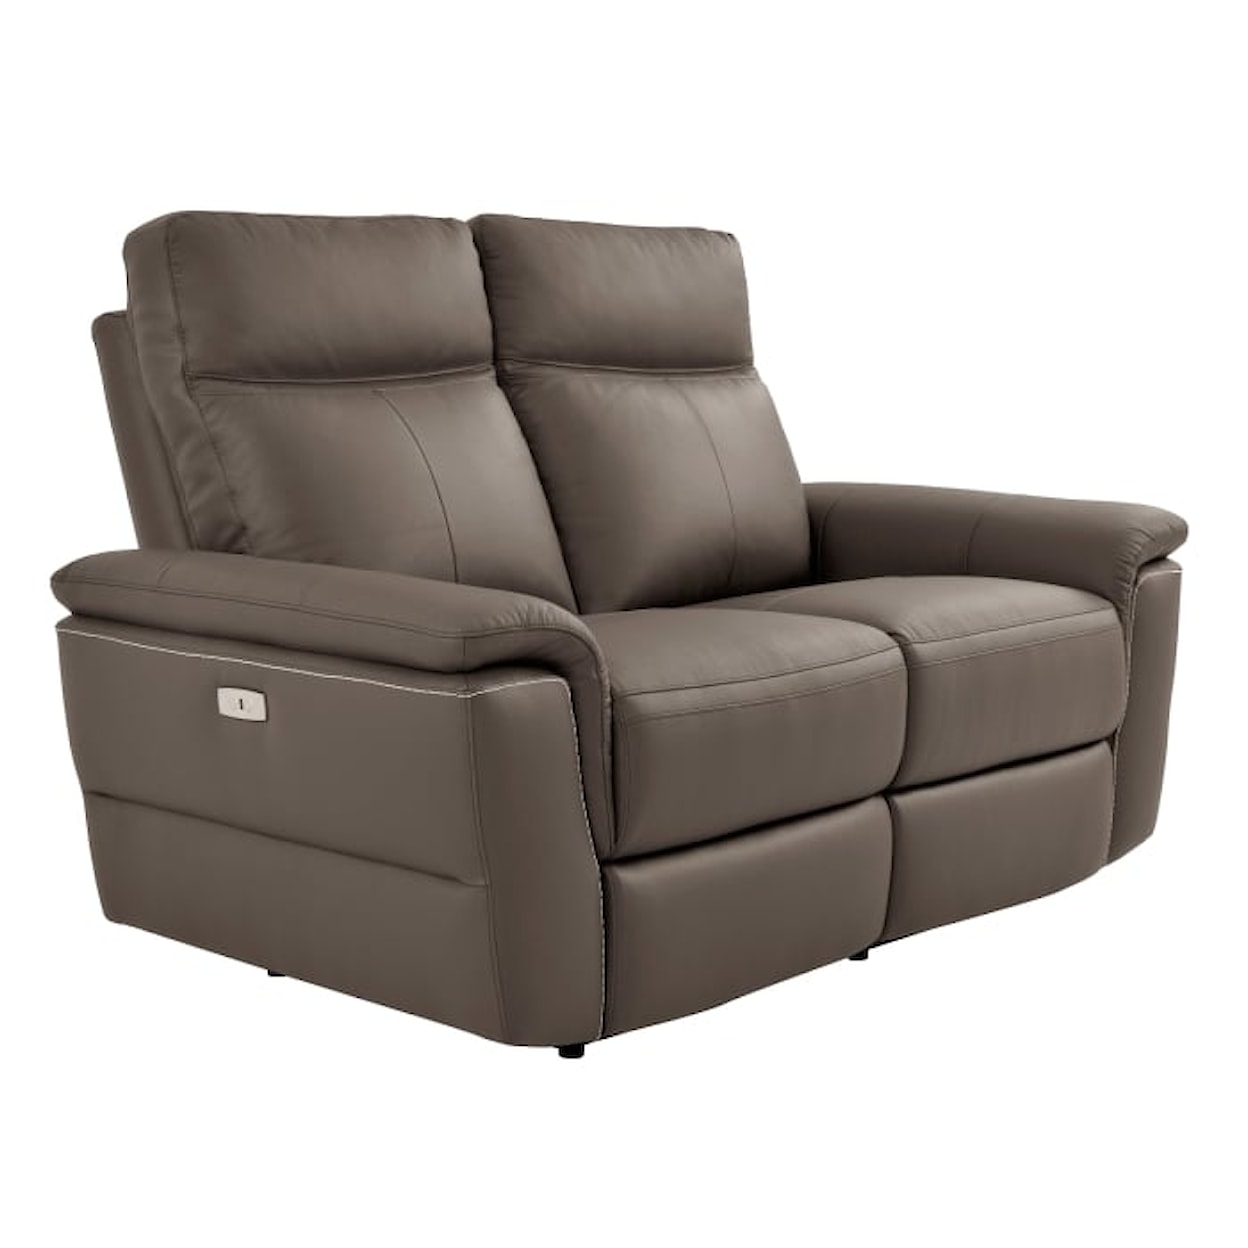 Homelegance Furniture Olympia 2-Piece Power Reclining Living Room Set